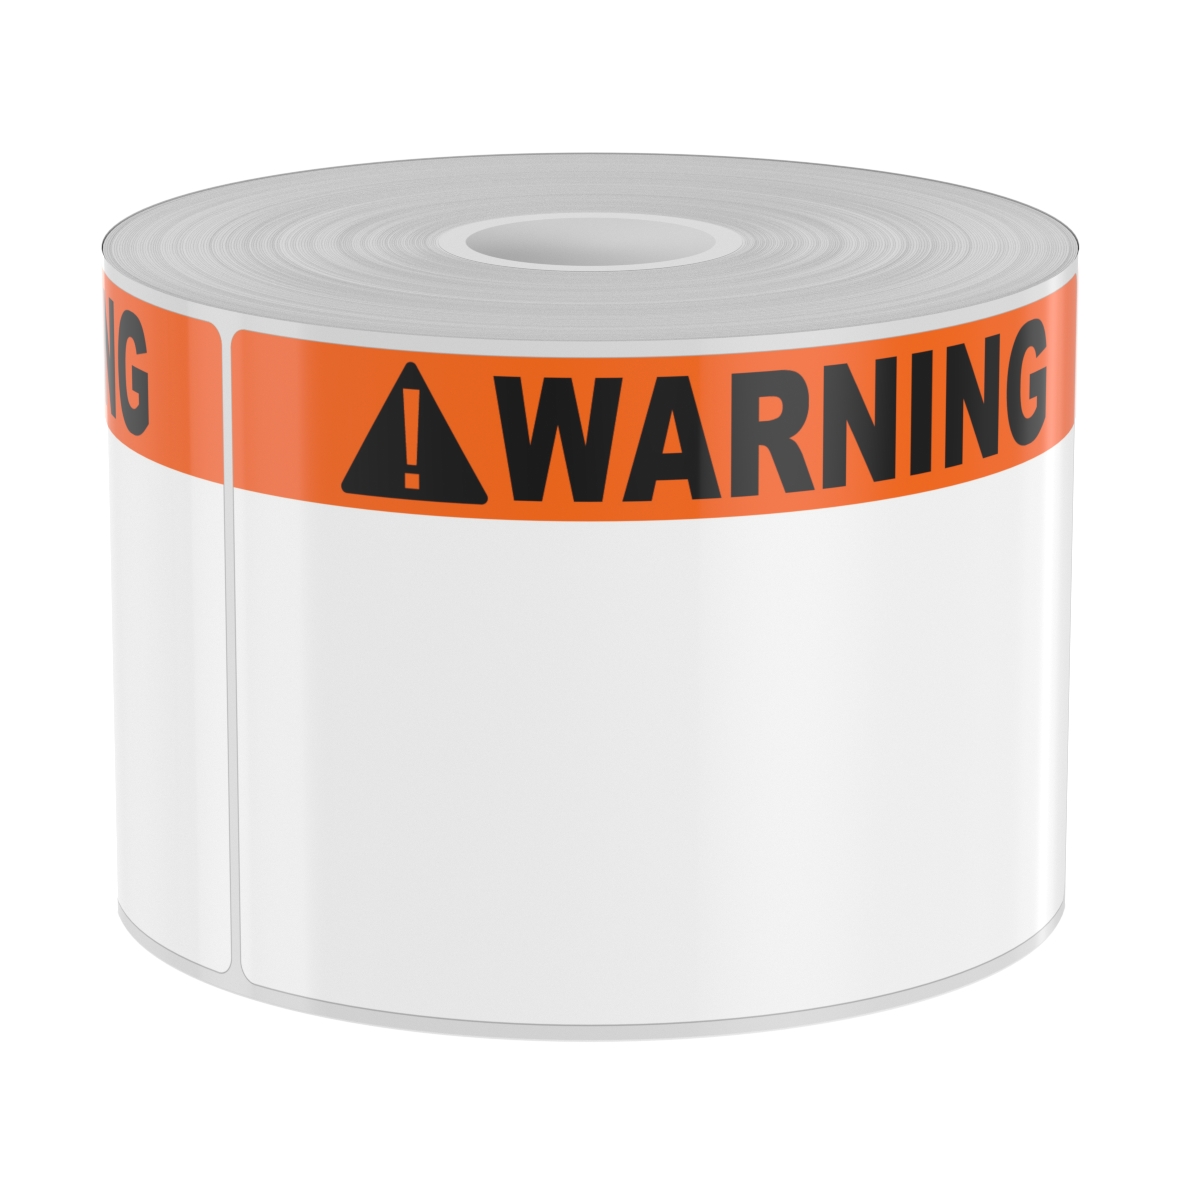 Detail view for 250 3" x 5" High-Performance Orange Band with Black Warning